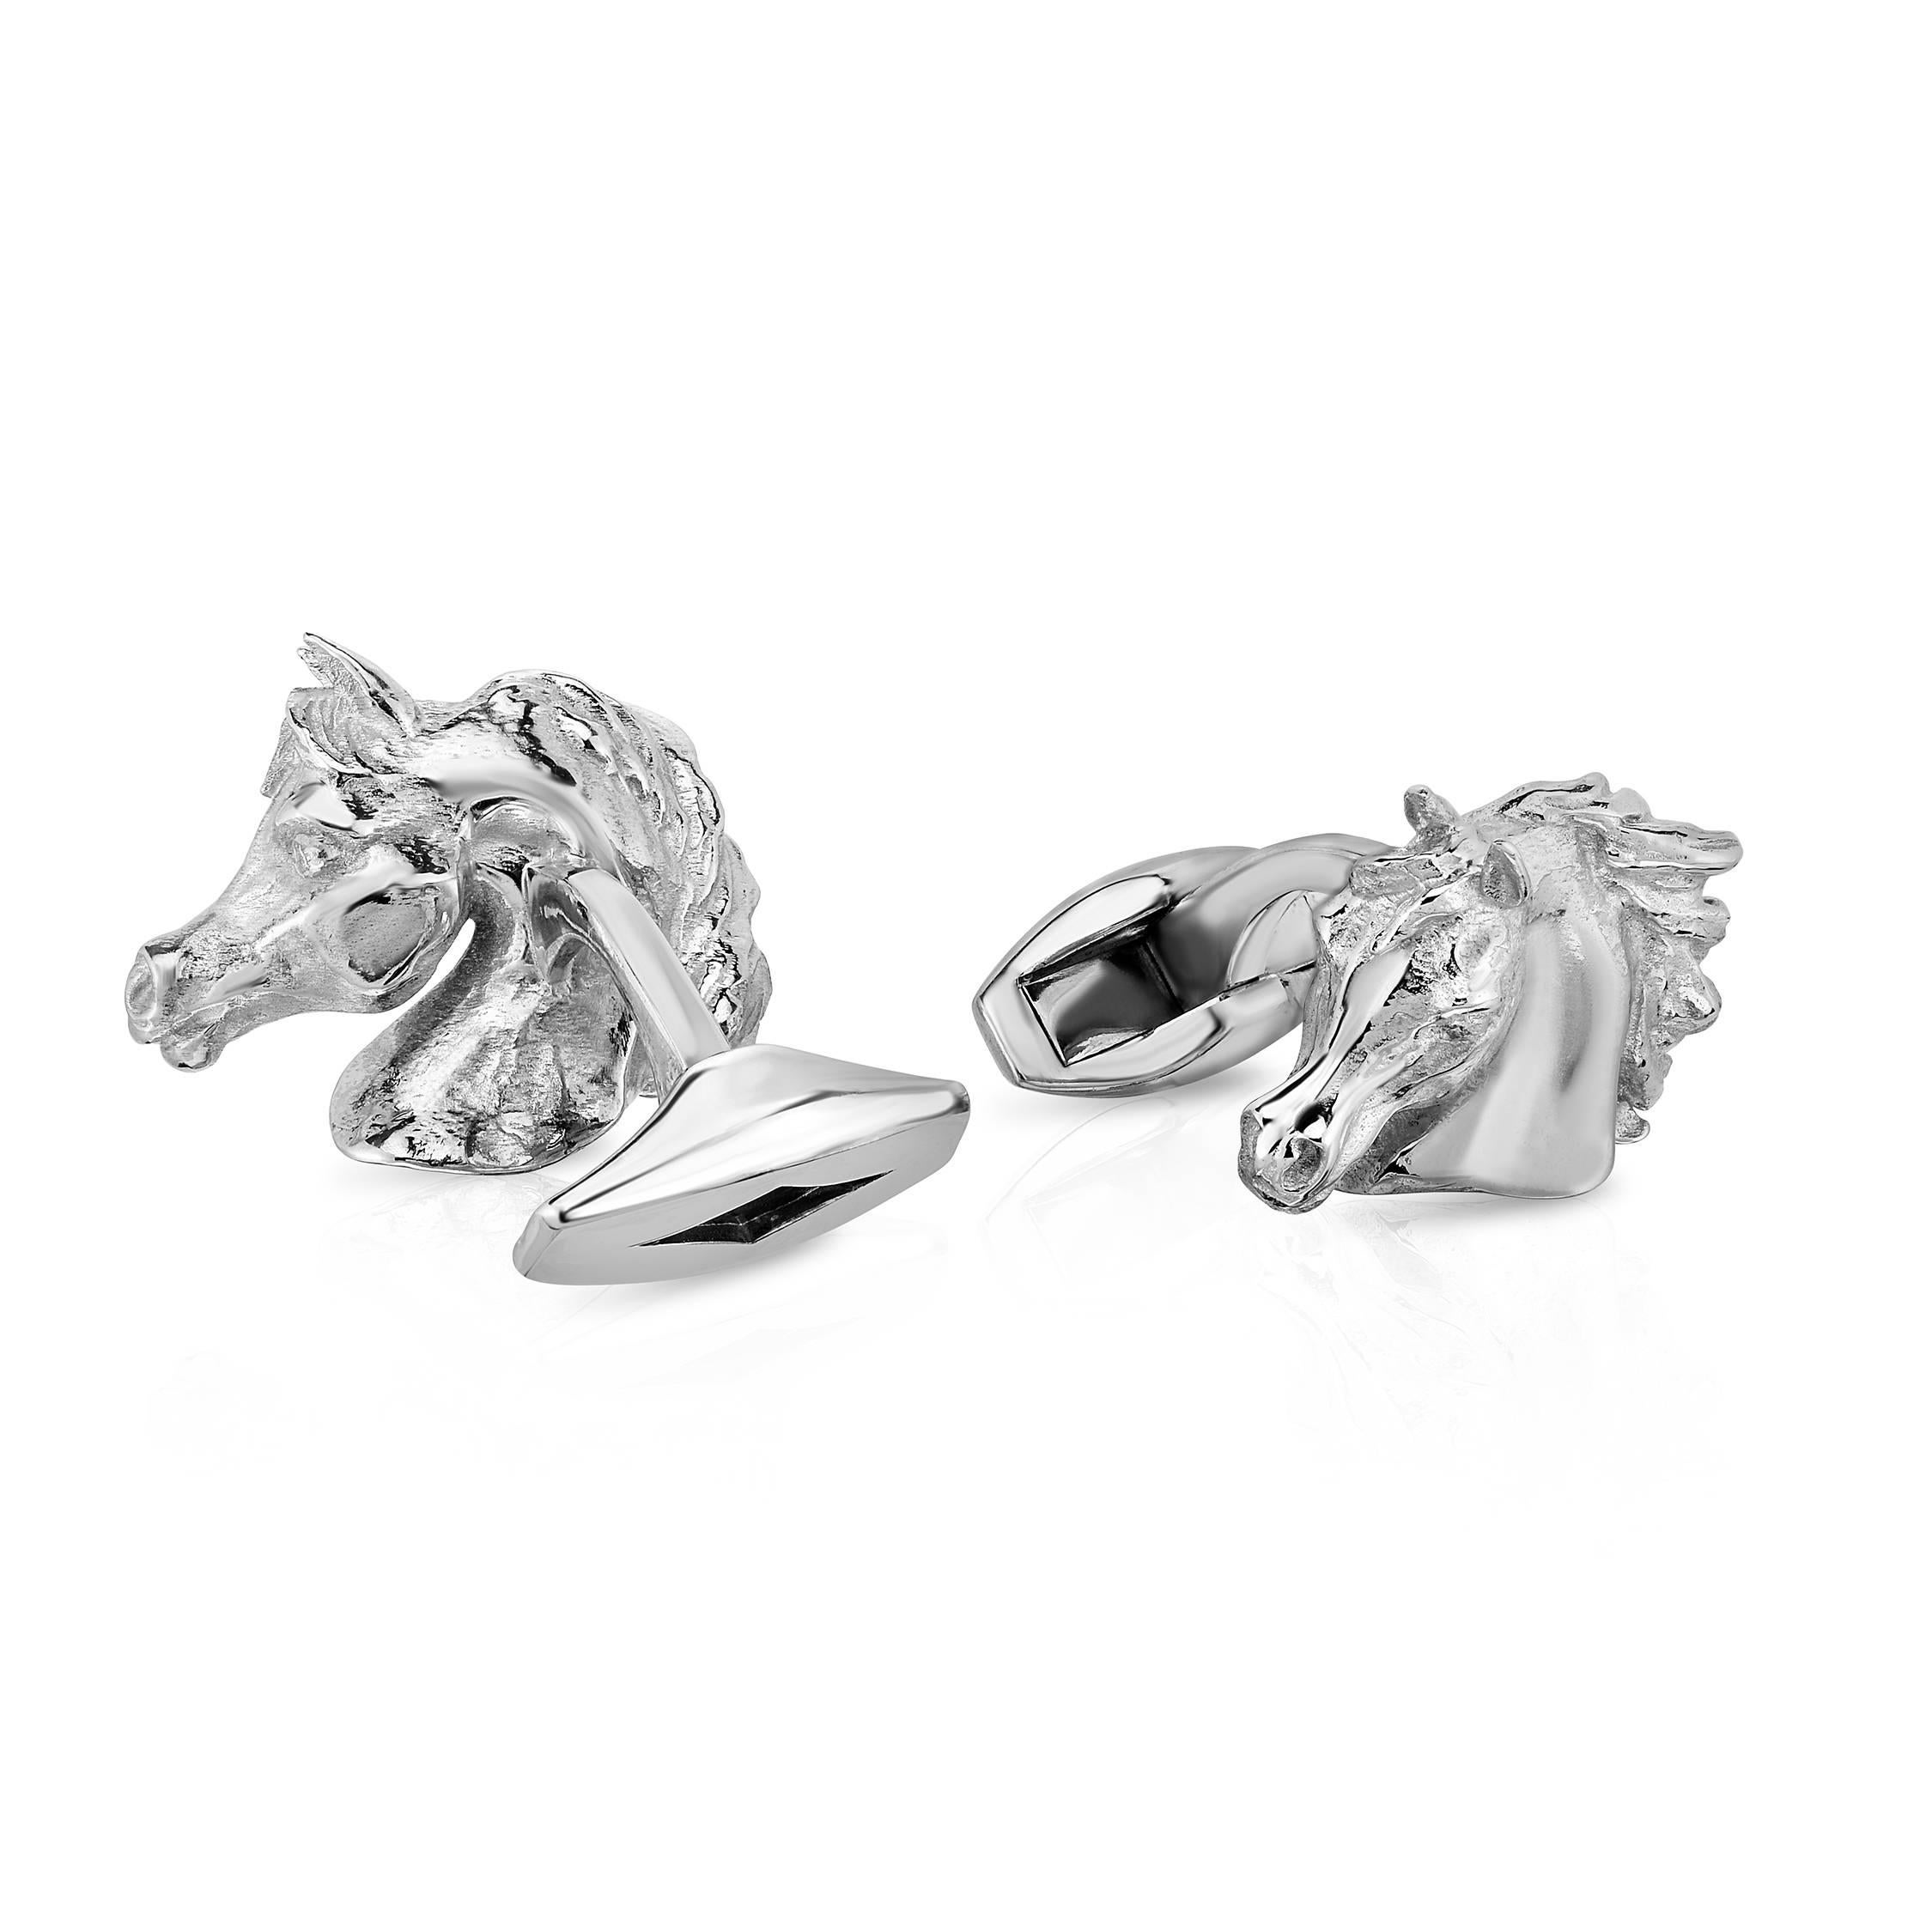 Marisa Perry Arabian Horse cufflinks in sterling silver. Hand made in New York City by a master jeweler. Perfect as a groomsman's gift or for Father's Day. Gender neutral, these make the perfect gift for anyone who loves elegance. Free shipping and